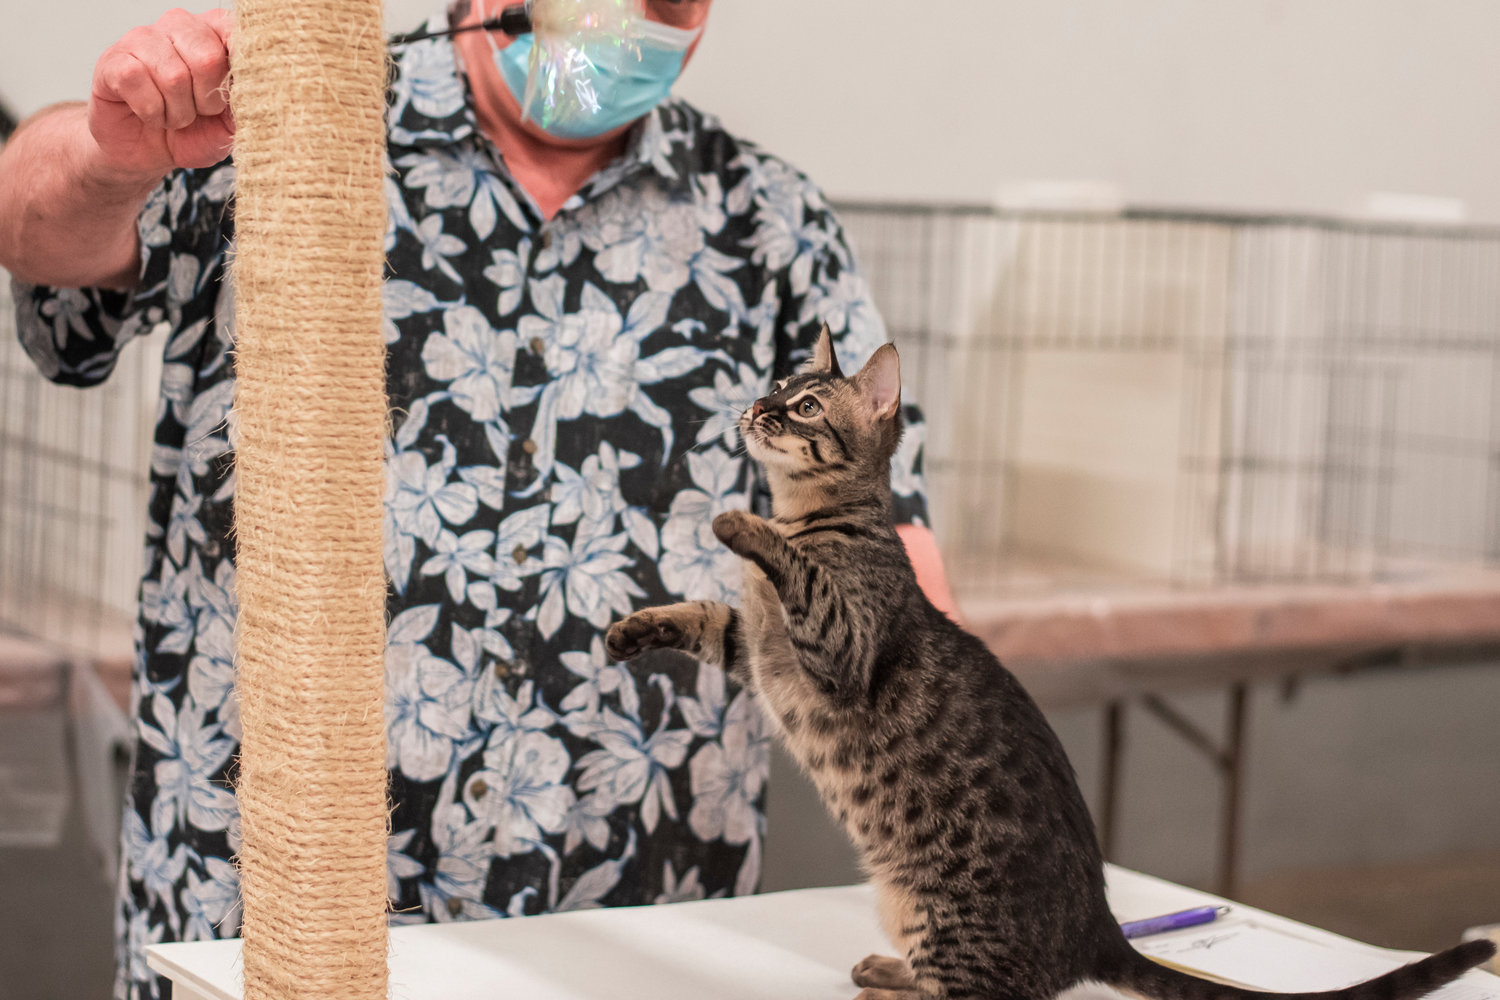 Cloudsrest, a Charcoal Savannah cat owned by Julie Laney, of Rainier looks on while playing with a toy held by Judge Jim Armel at the Southwest Washington Fairgrounds on Sunday.